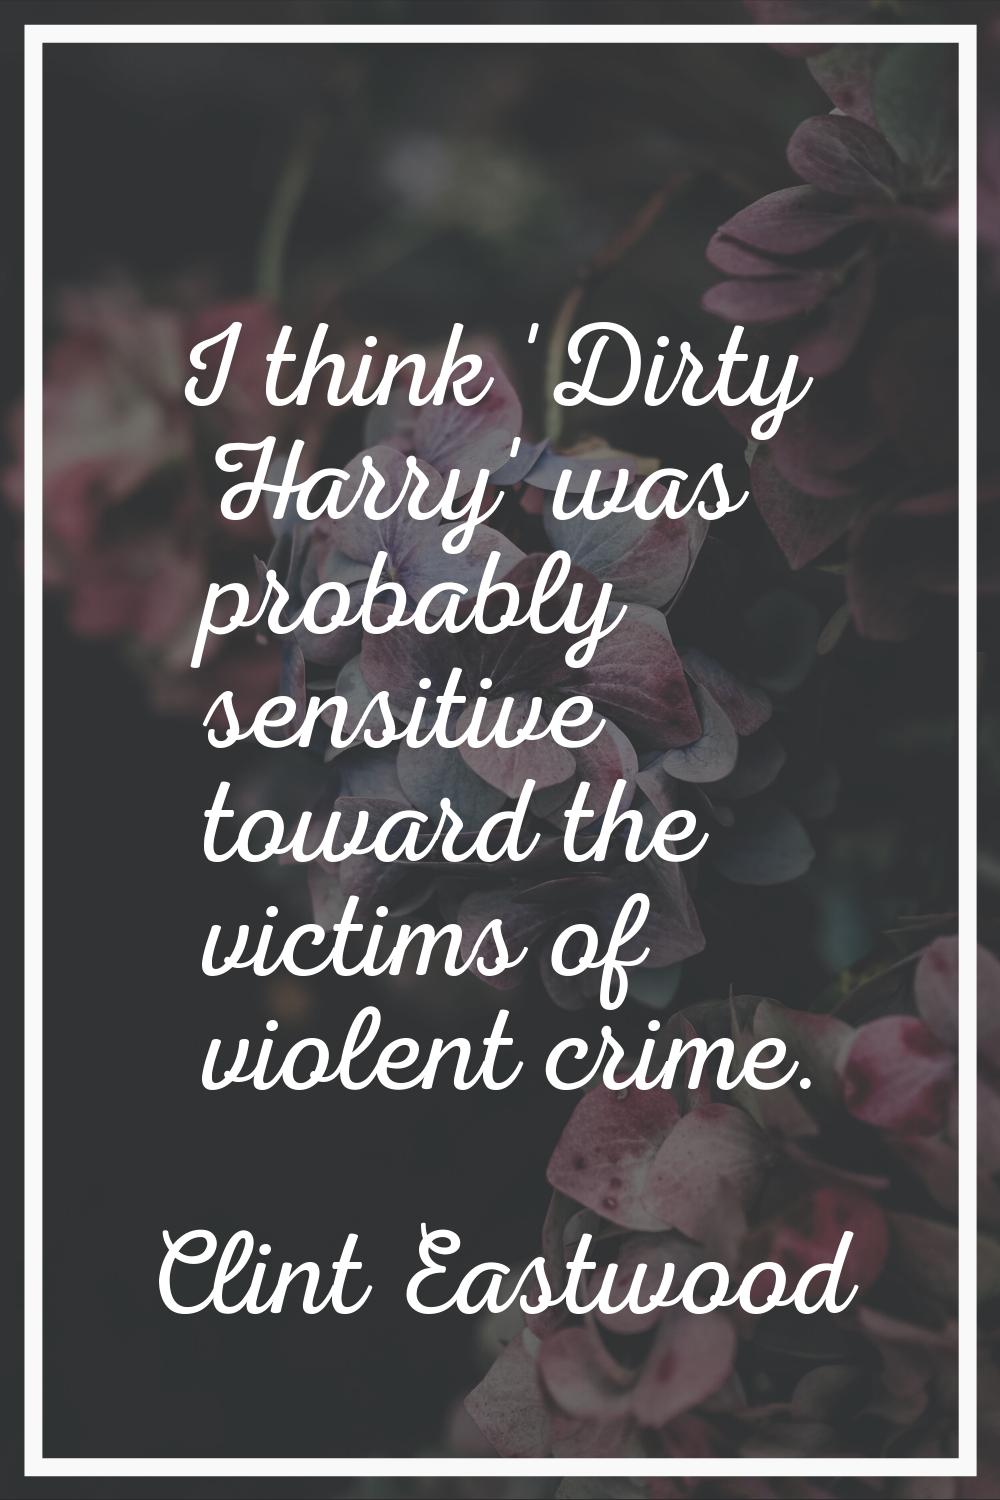 I think 'Dirty Harry' was probably sensitive toward the victims of violent crime.